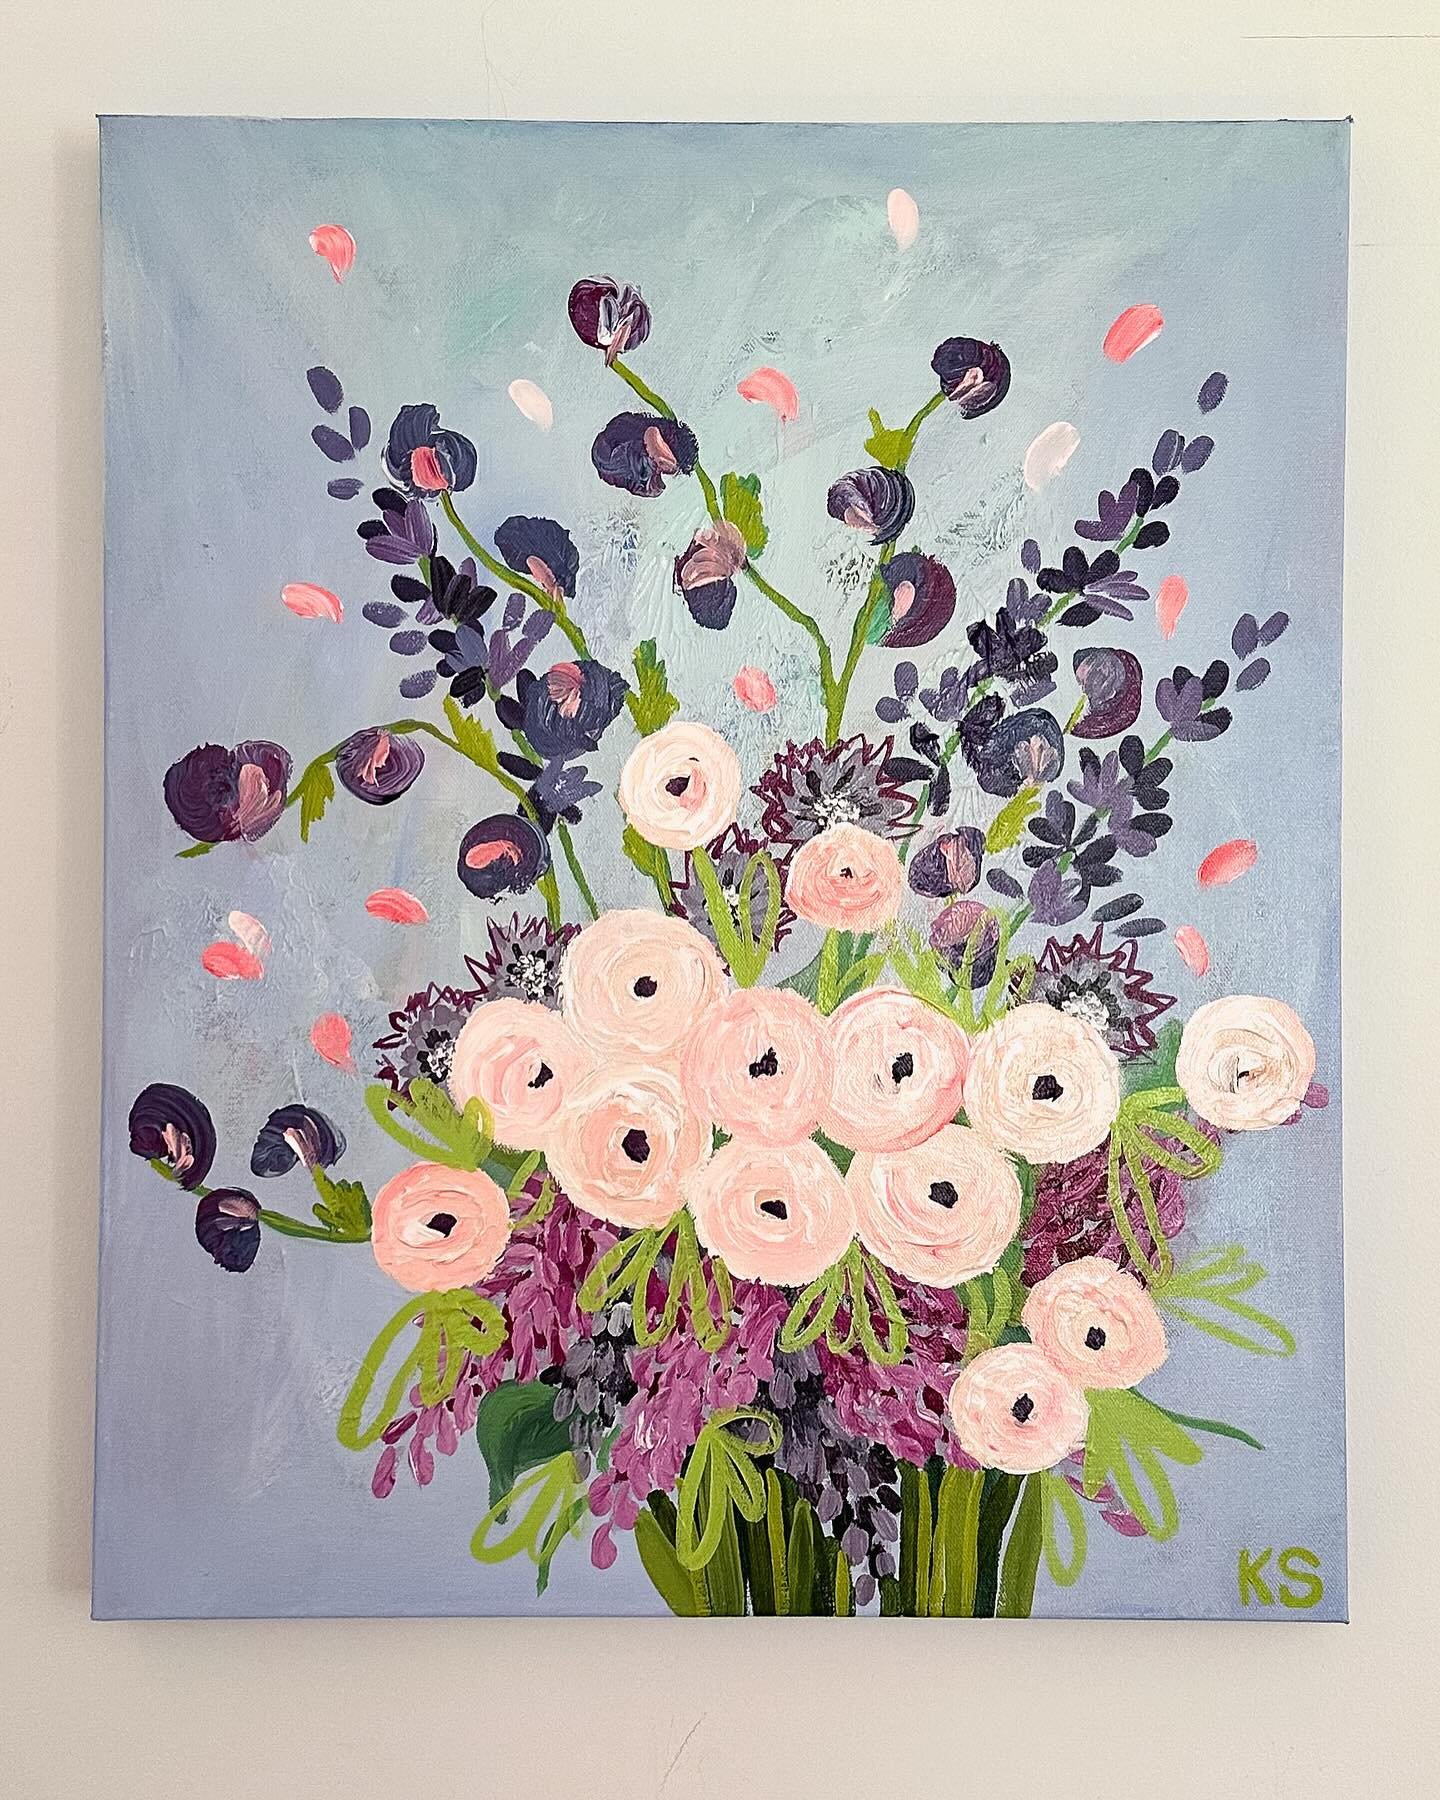 All the periwinkle, lavender, ultramarine 💜 Lilac, sweet pea, delphinium, bachelors button, and ranunculus sit together against a layered and textured background. 

A jolt of happiness. A burst of blooms. A playful pop of color. 

Part of the SUPERB